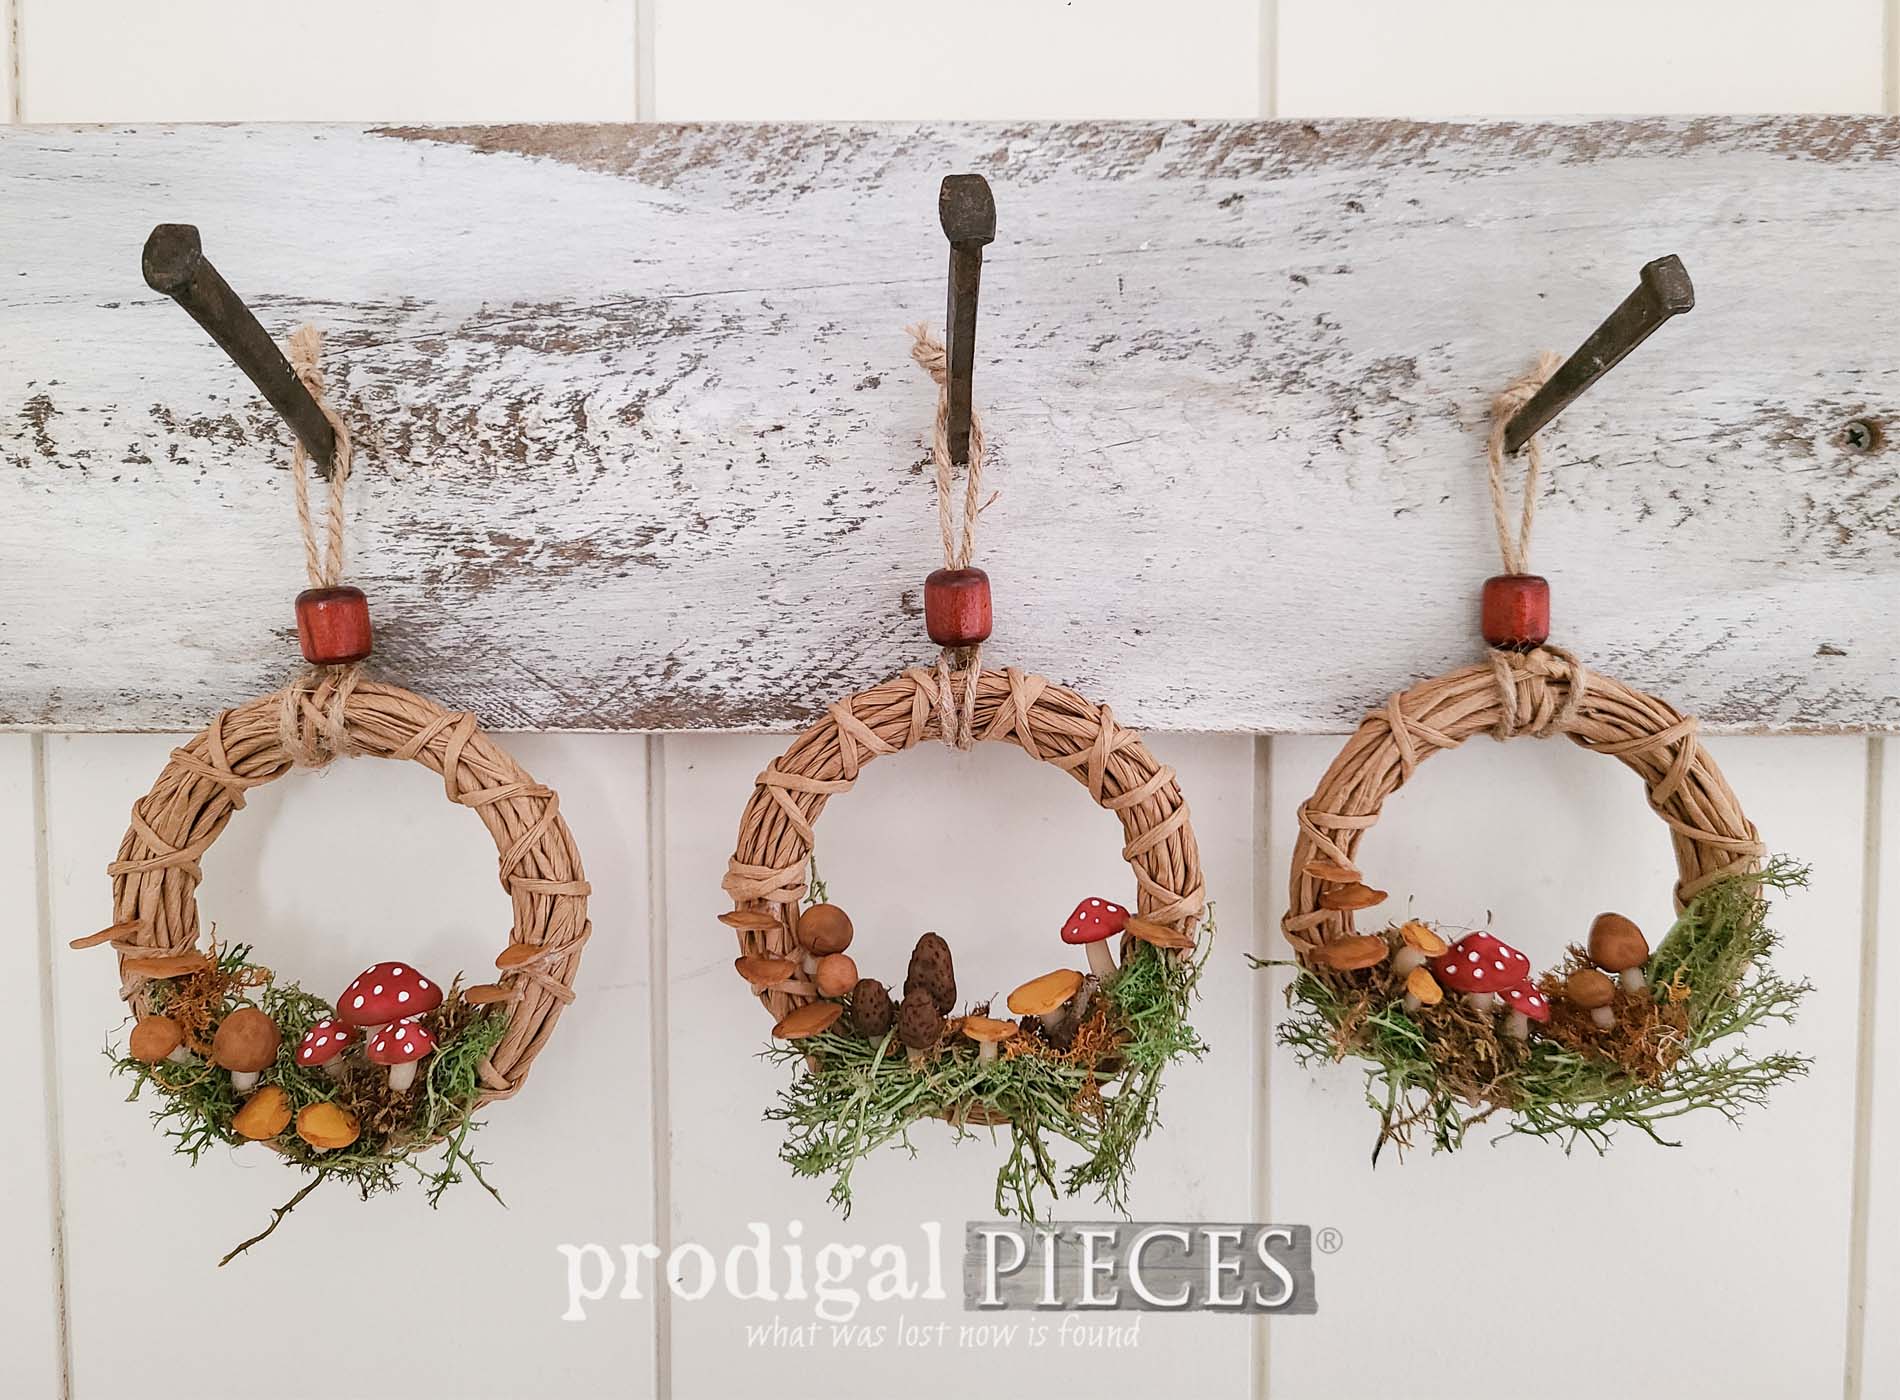 Upcycled Baking Pan Christmas Wreath - Project